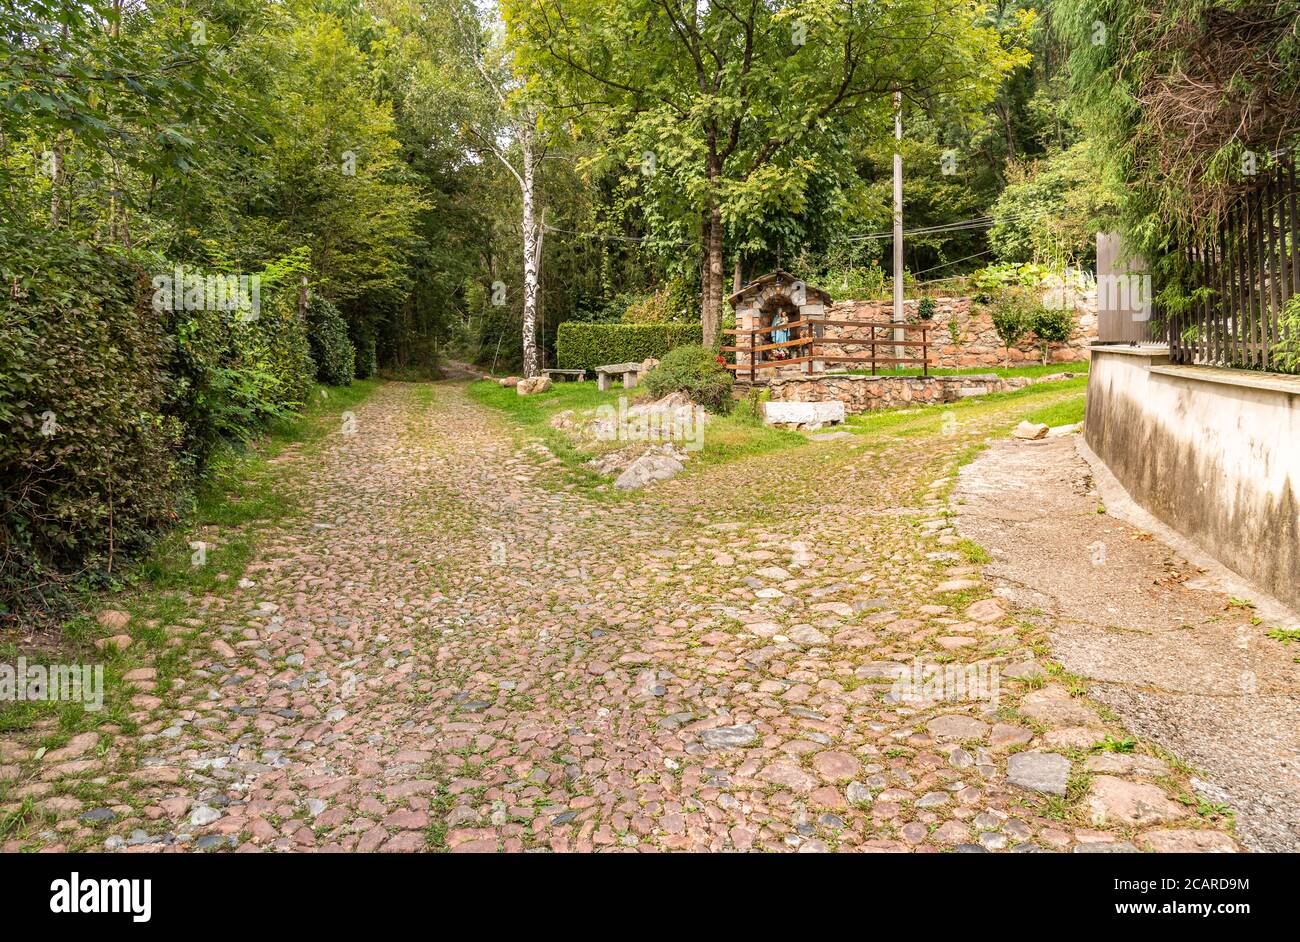 The Paths of the Regional Park of Brinzio, province of Varese, Lombardy, Italy Stock Photo